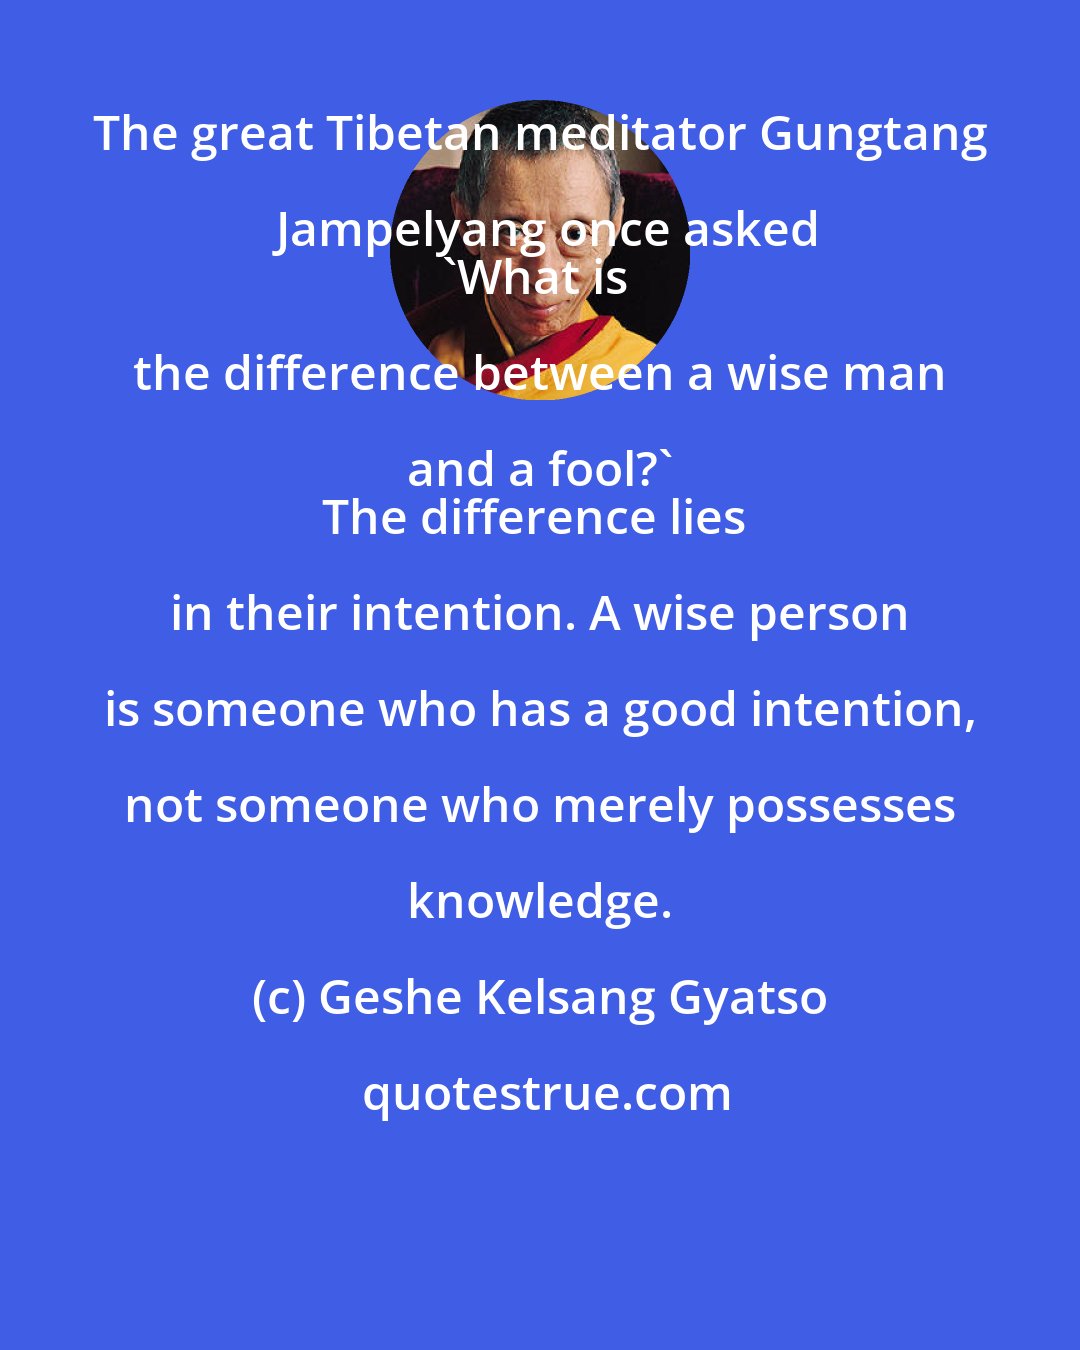 Geshe Kelsang Gyatso: The great Tibetan meditator Gungtang Jampelyang once asked
'What is the difference between a wise man and a fool?' 
The difference lies in their intention. A wise person is someone who has a good intention, not someone who merely possesses knowledge.